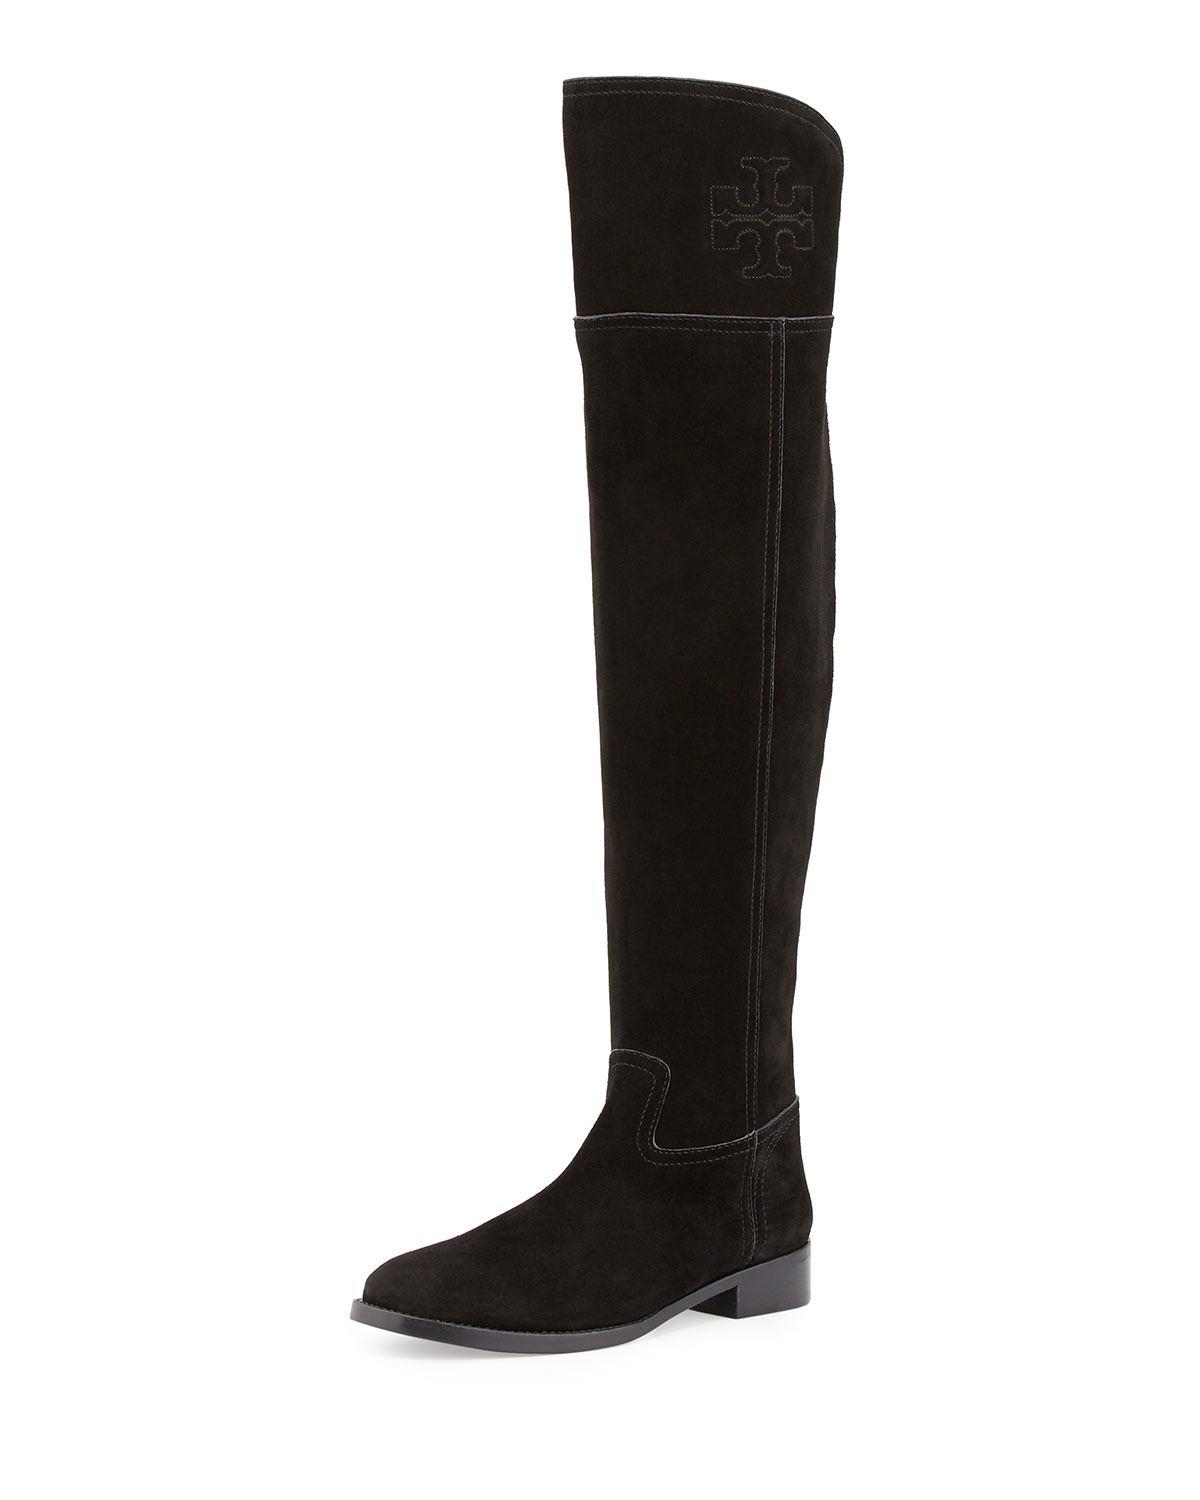 Tory burch Simone Over-The-Knee Suede Boot in Black | Lyst